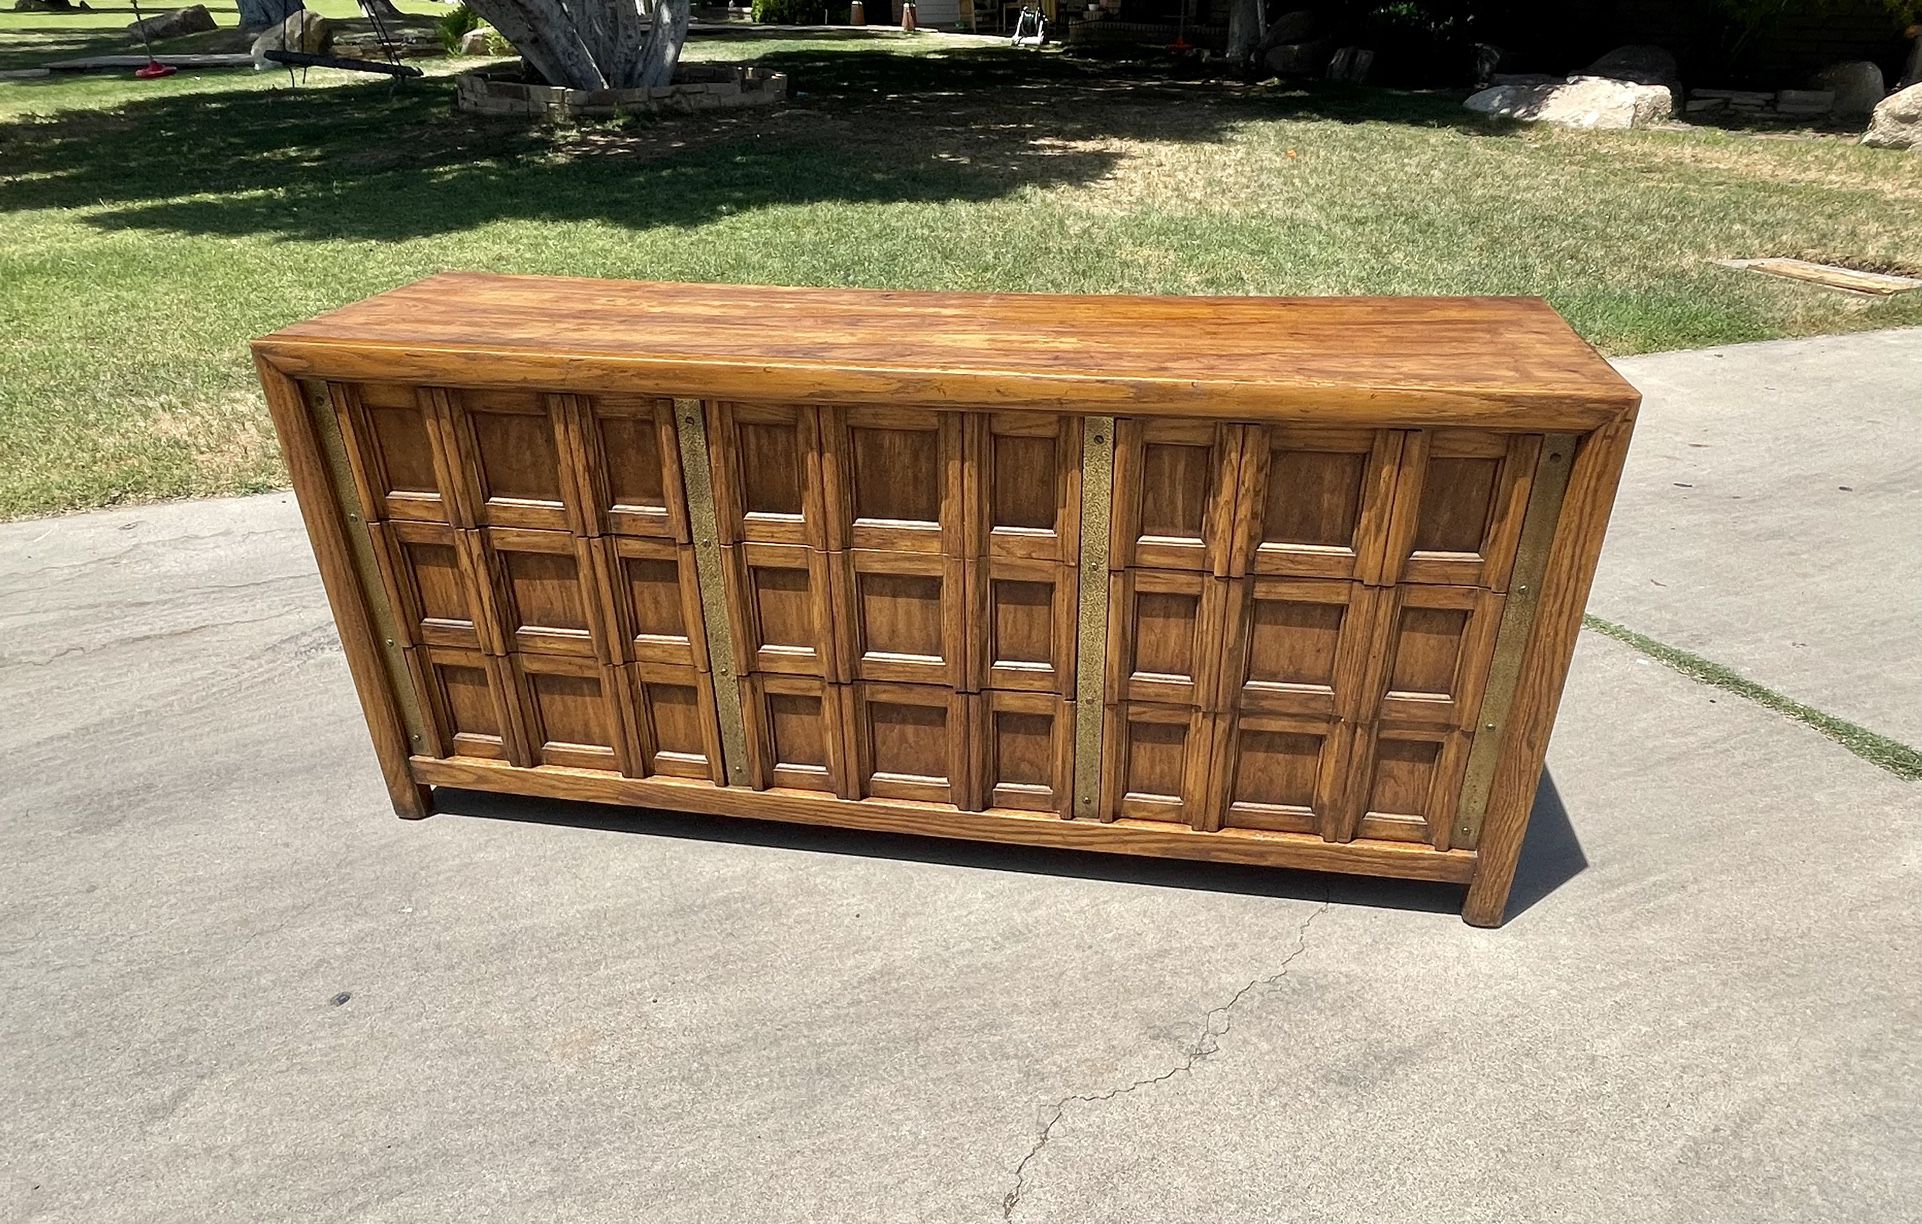 Mid Century Modern Dresser, Buffet, Credenza, Sideboard, All Wood Made In America Thomasville Brand With Dovetail Drawers